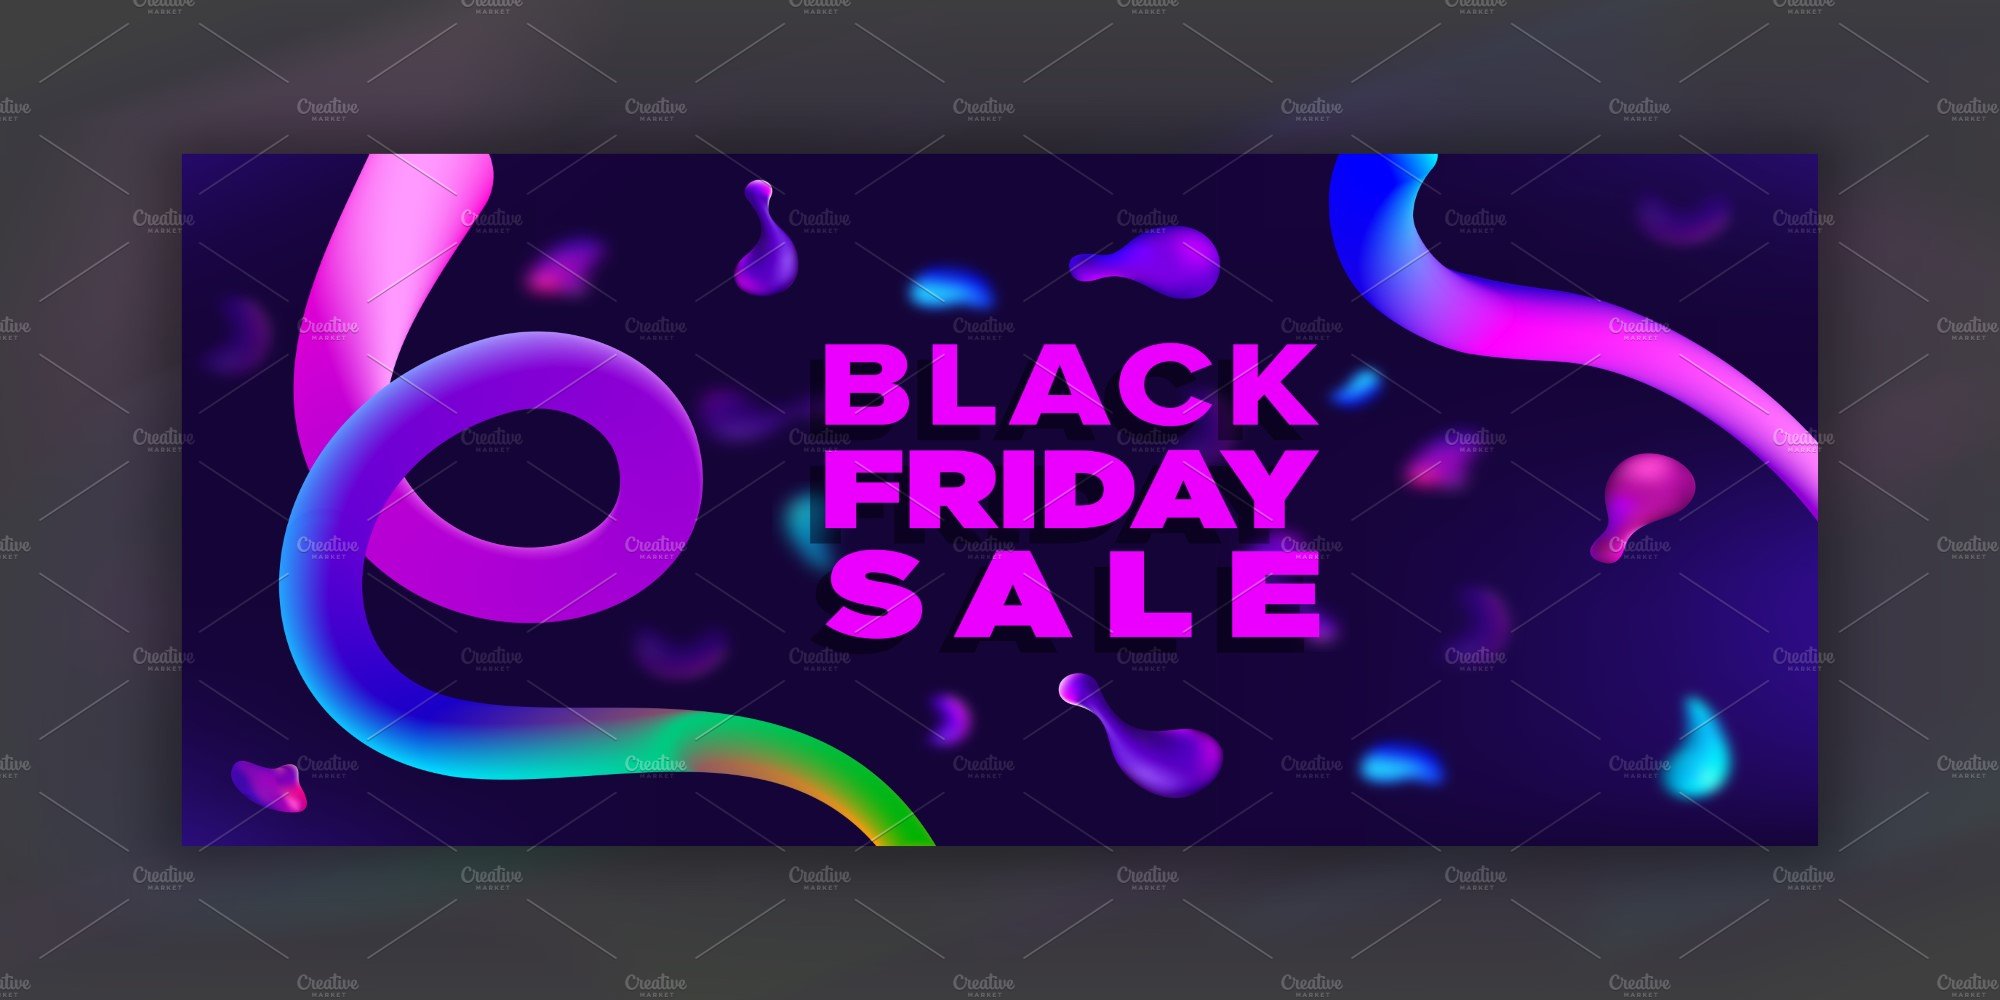 Dark Black Friday banner with colorful gradient elements.